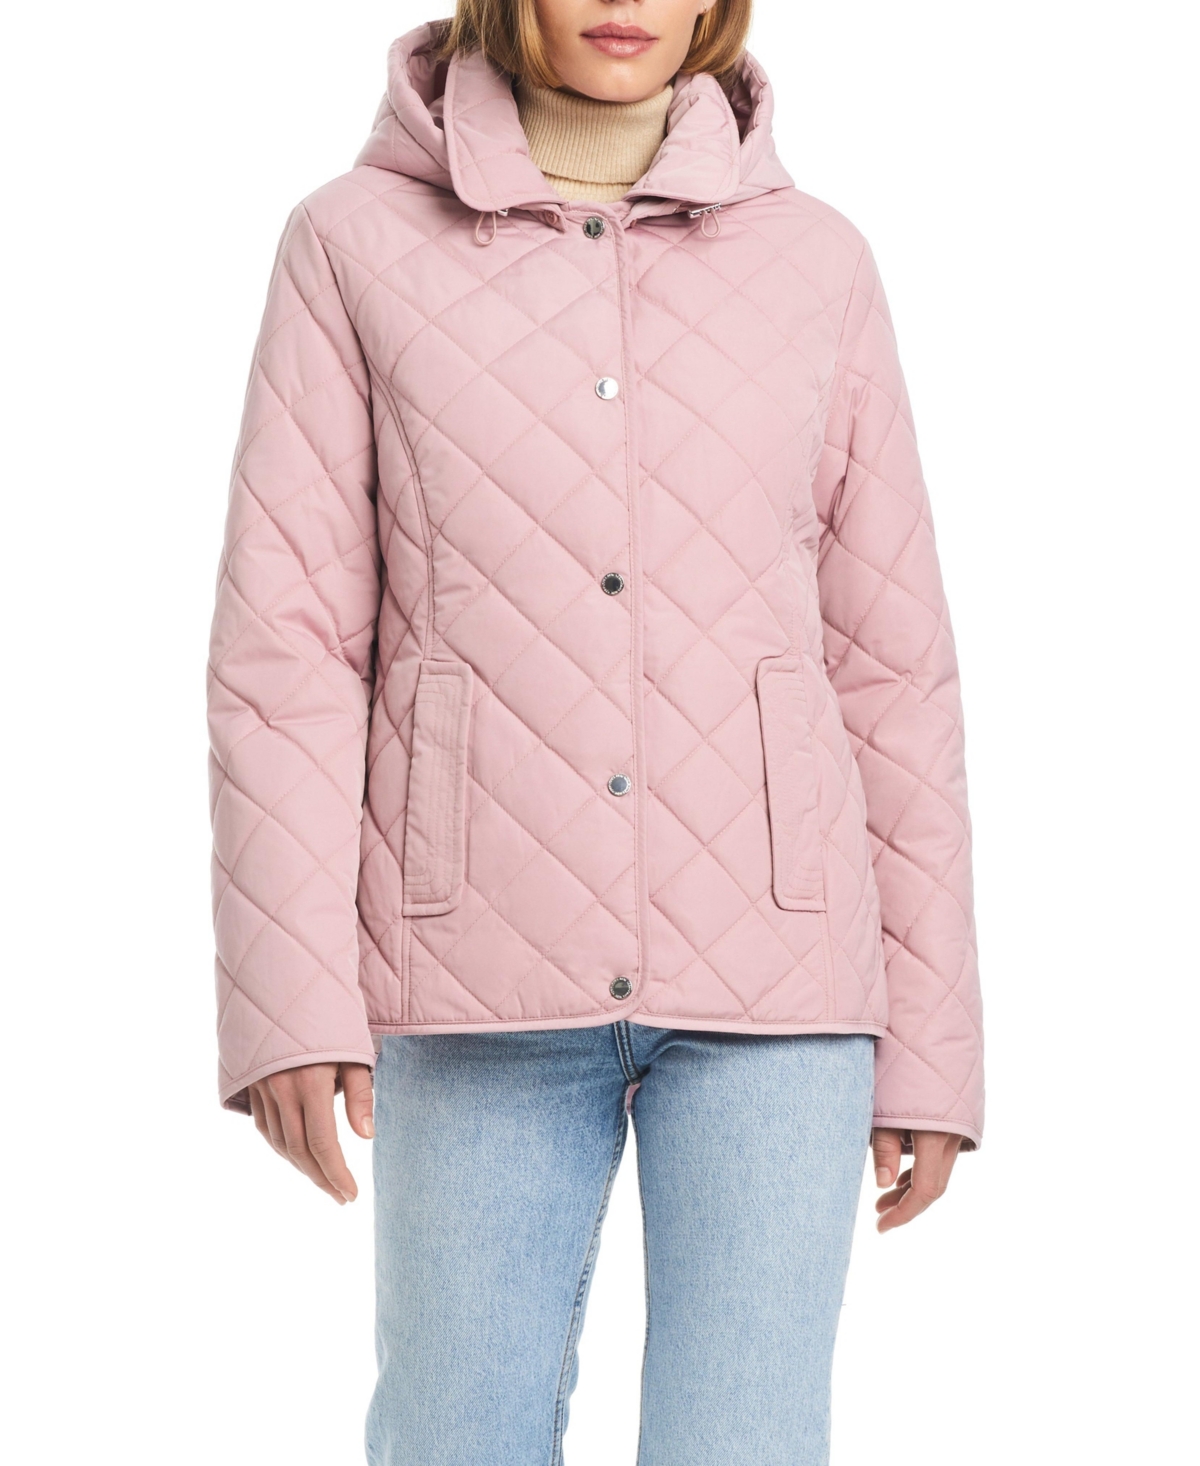 Women's Hooded Quilted Water-Resistant Jacket - Bone